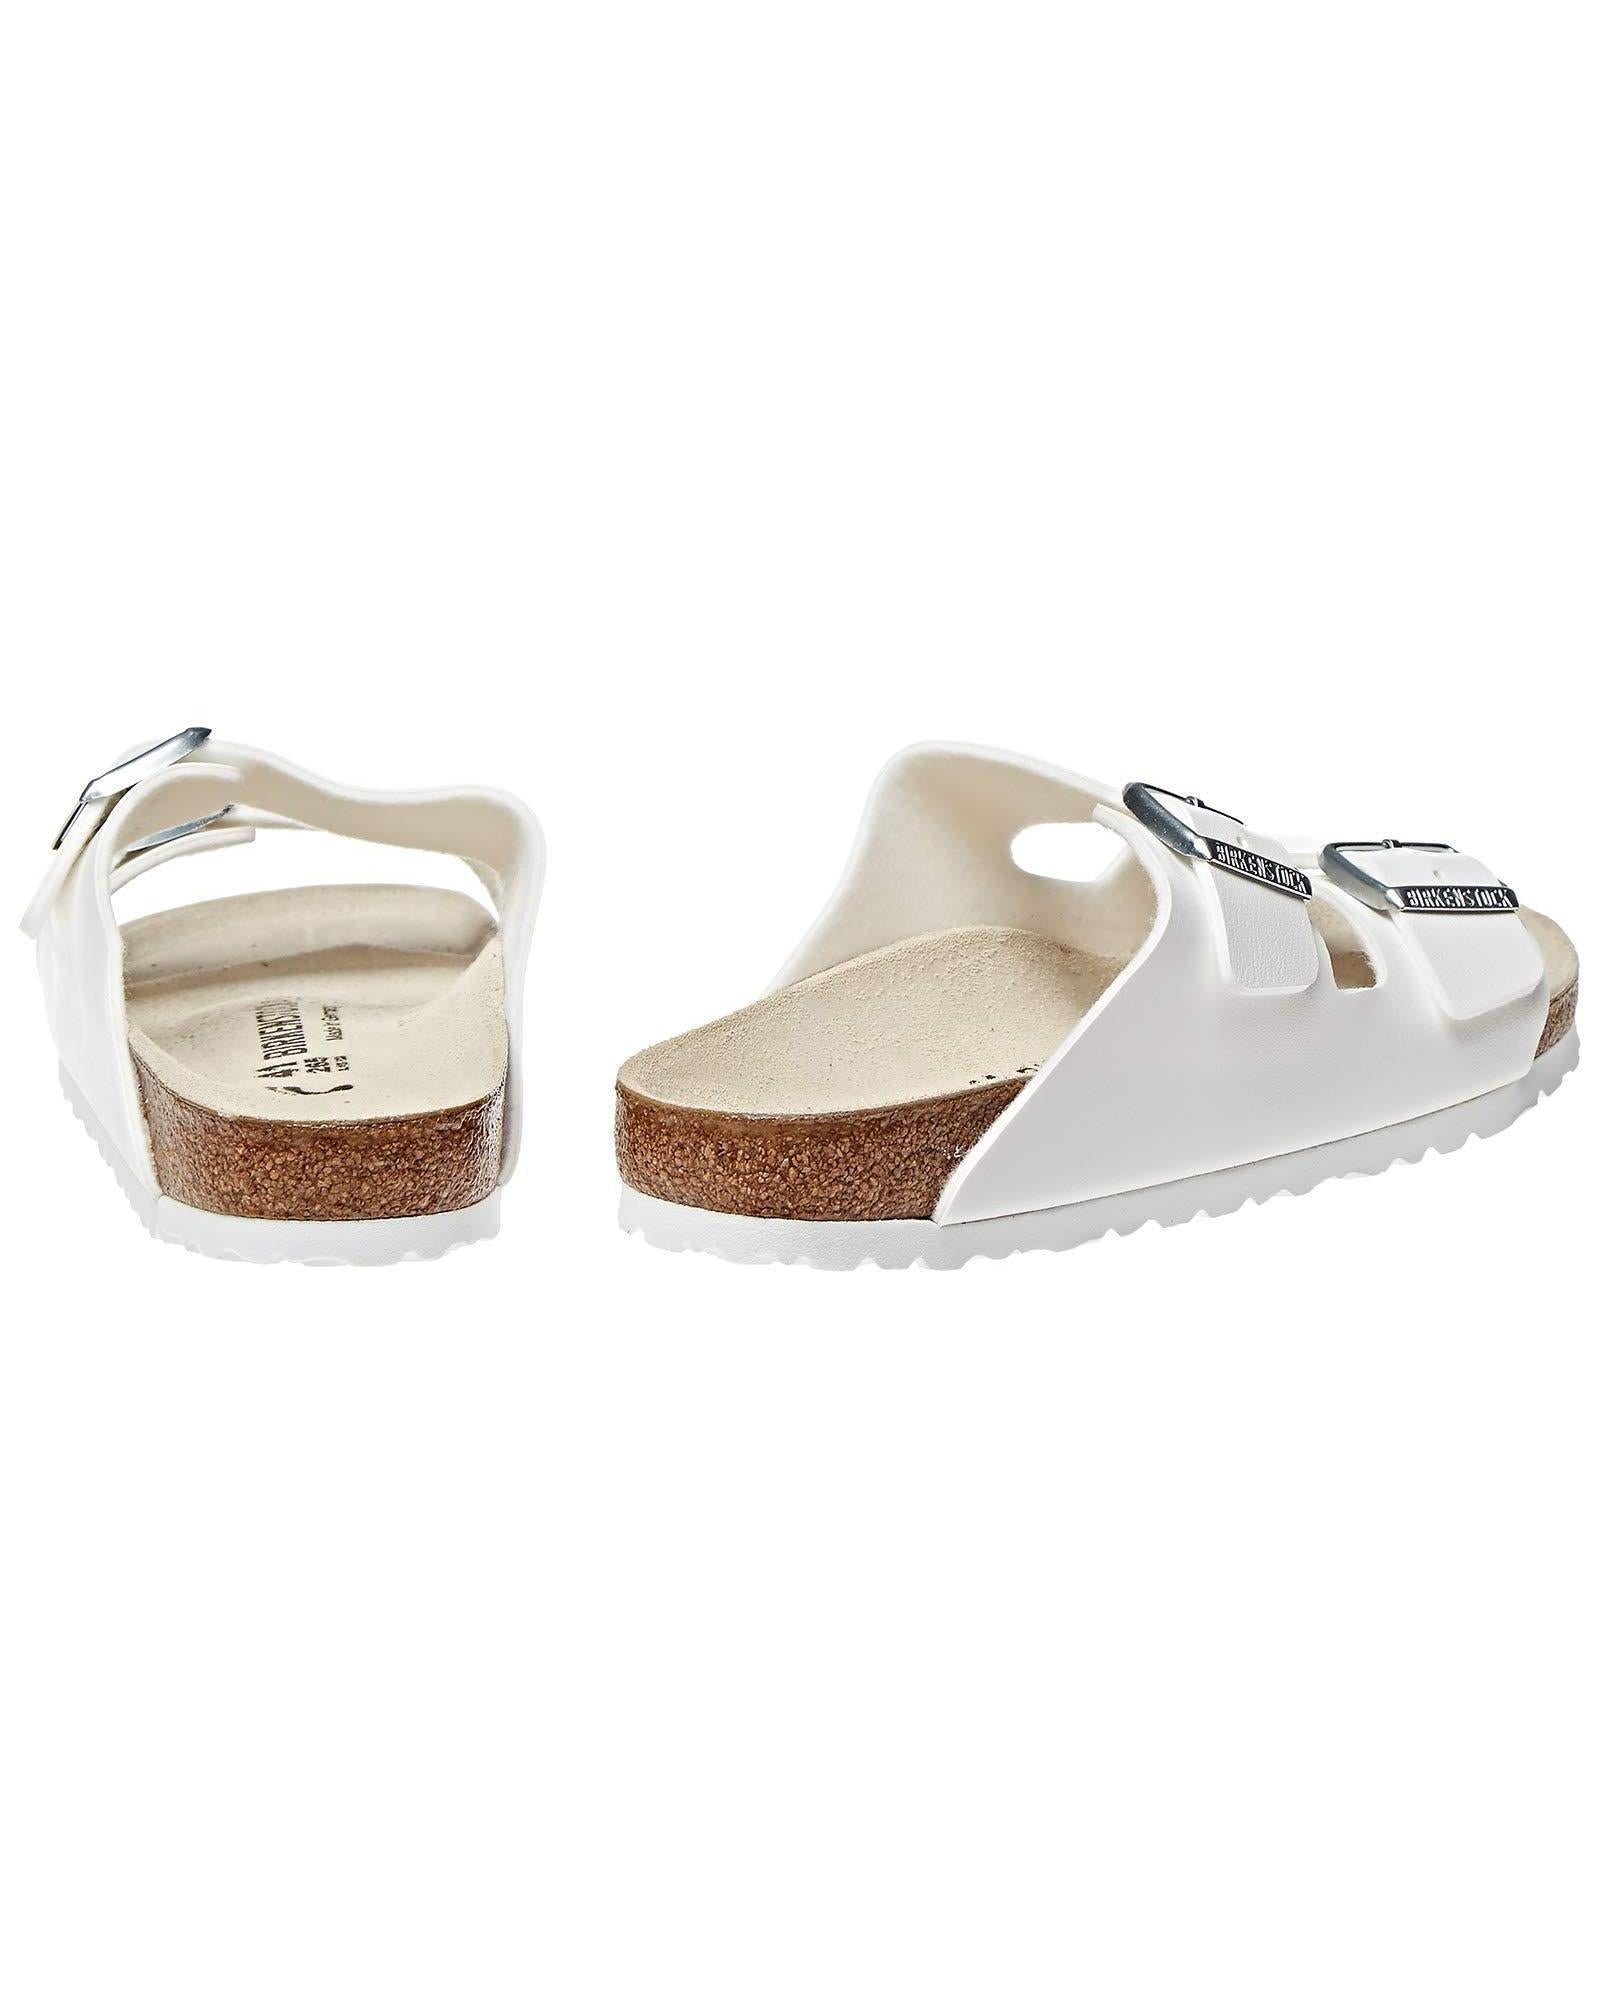 Handcrafted Leather Sandals with Arch Support - 41 EU